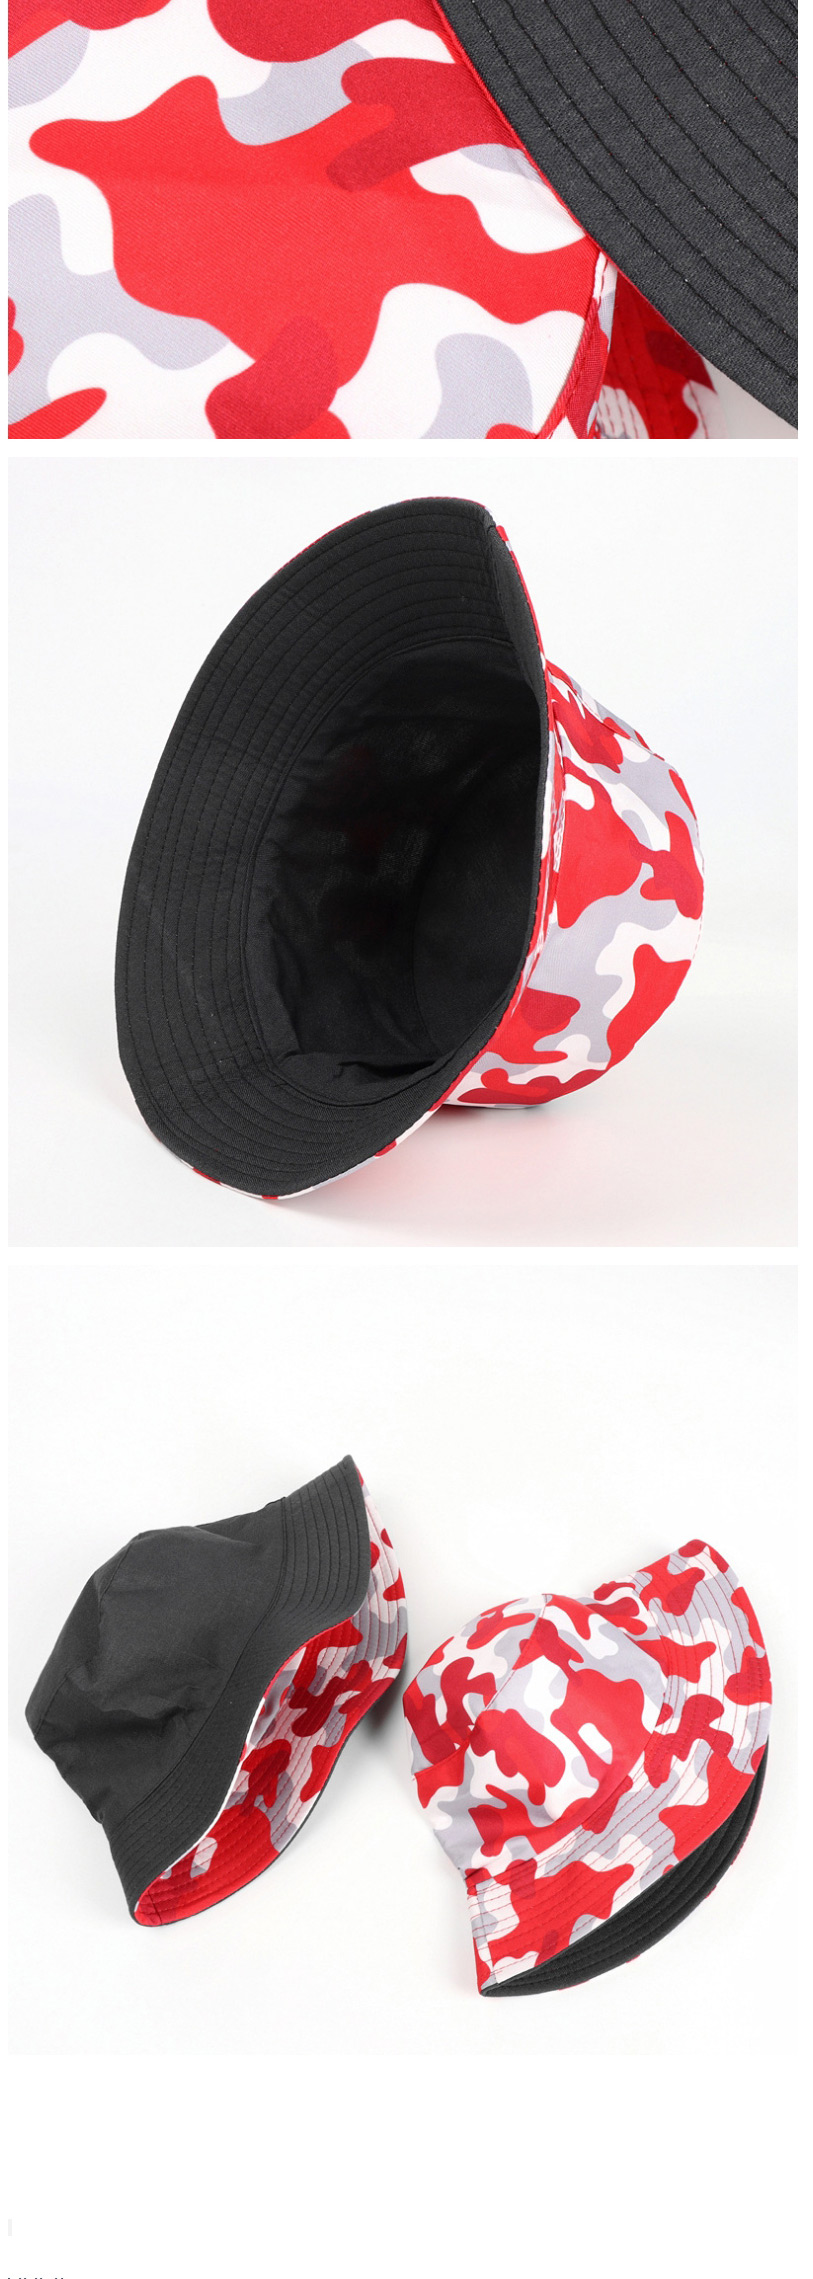 Fashion Red Printed Double-sided Multicolor Camouflage Fisherman Hat,Sun Hats